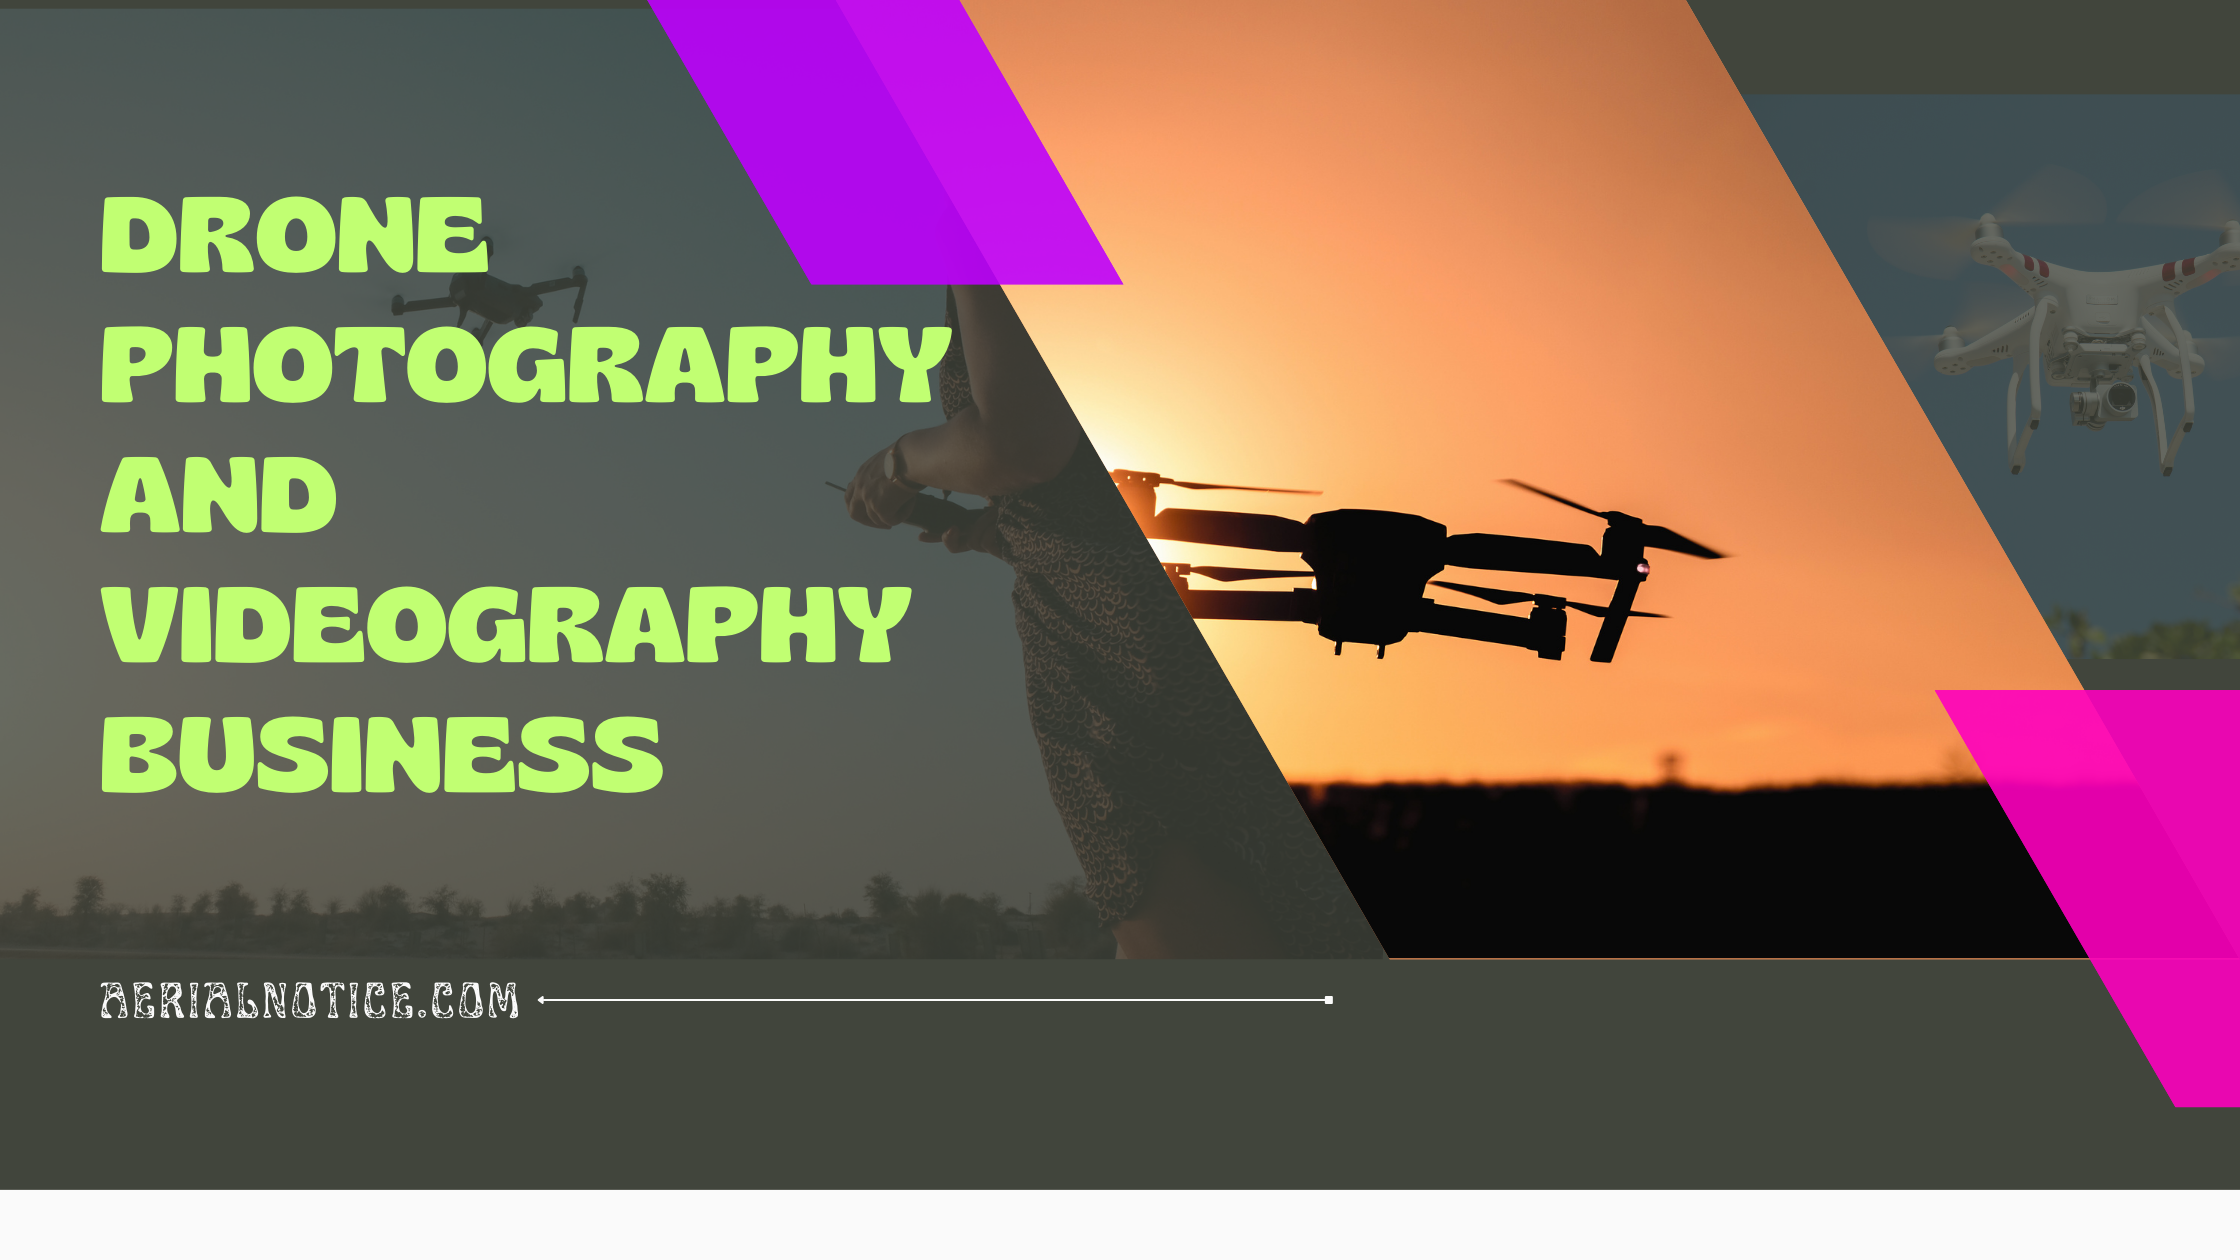 Drone Photography and Videography Business